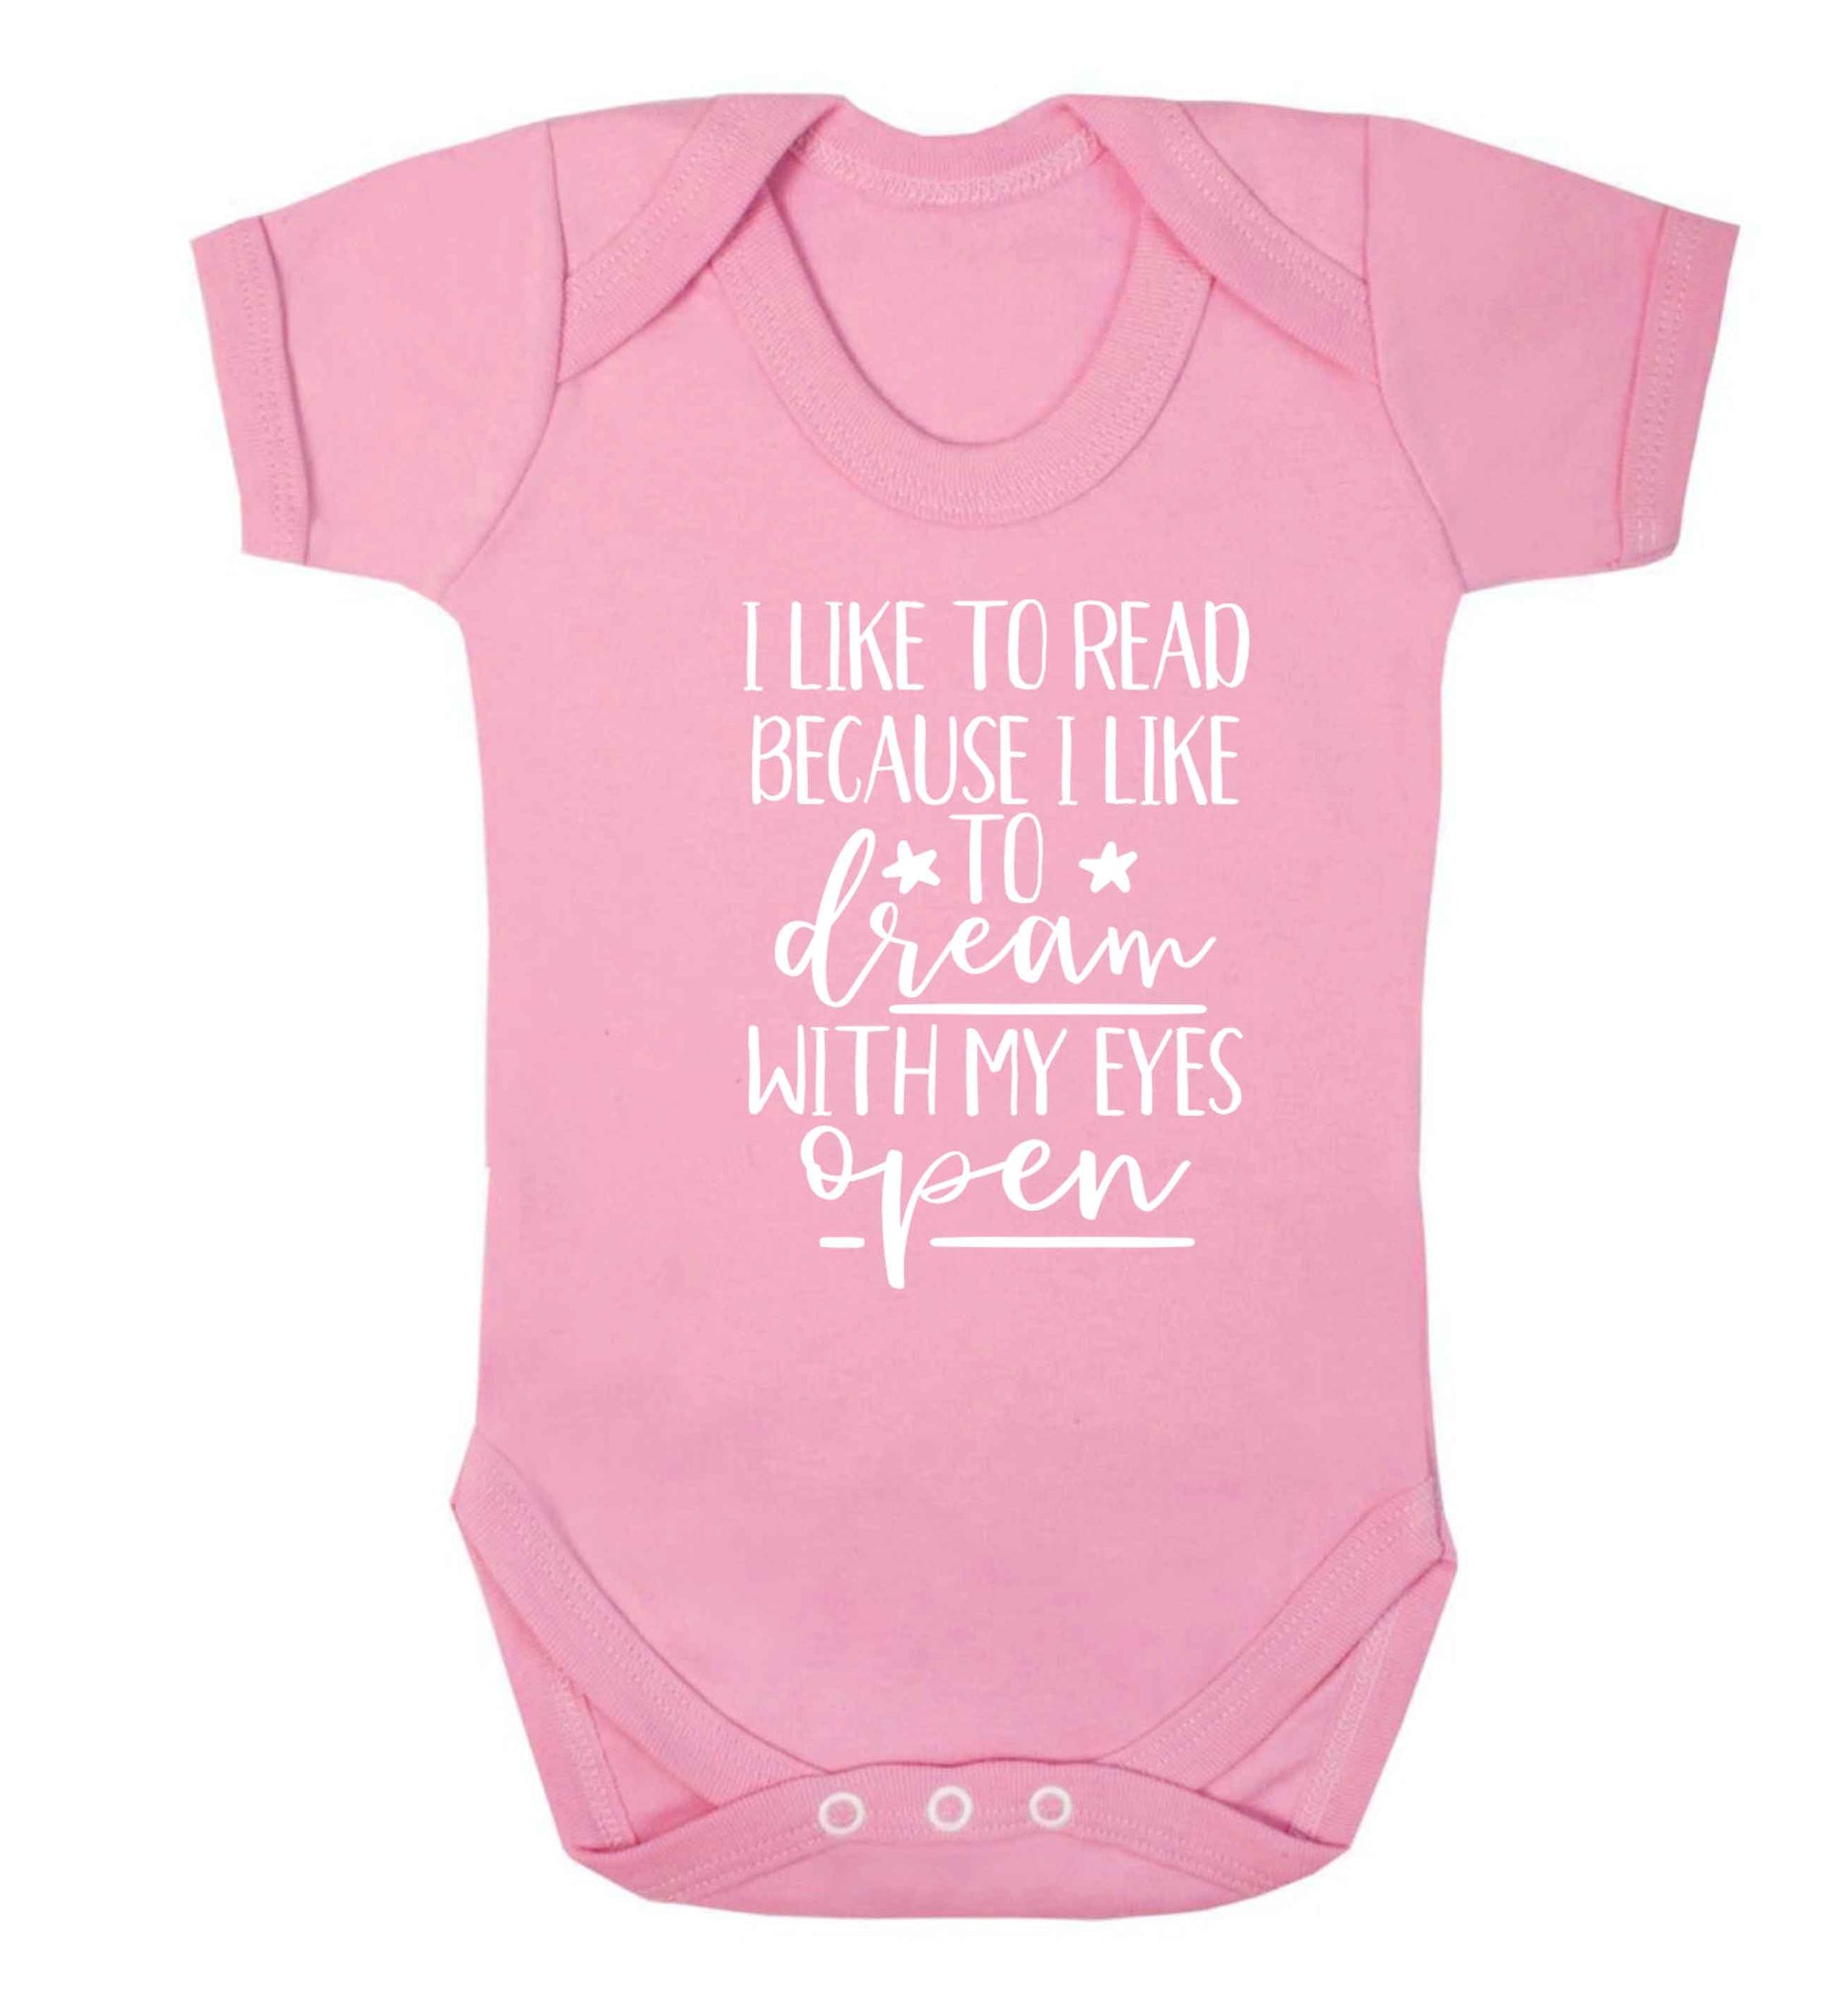 I like to read because I like to dream with my eyes open Baby Vest pale pink 18-24 months